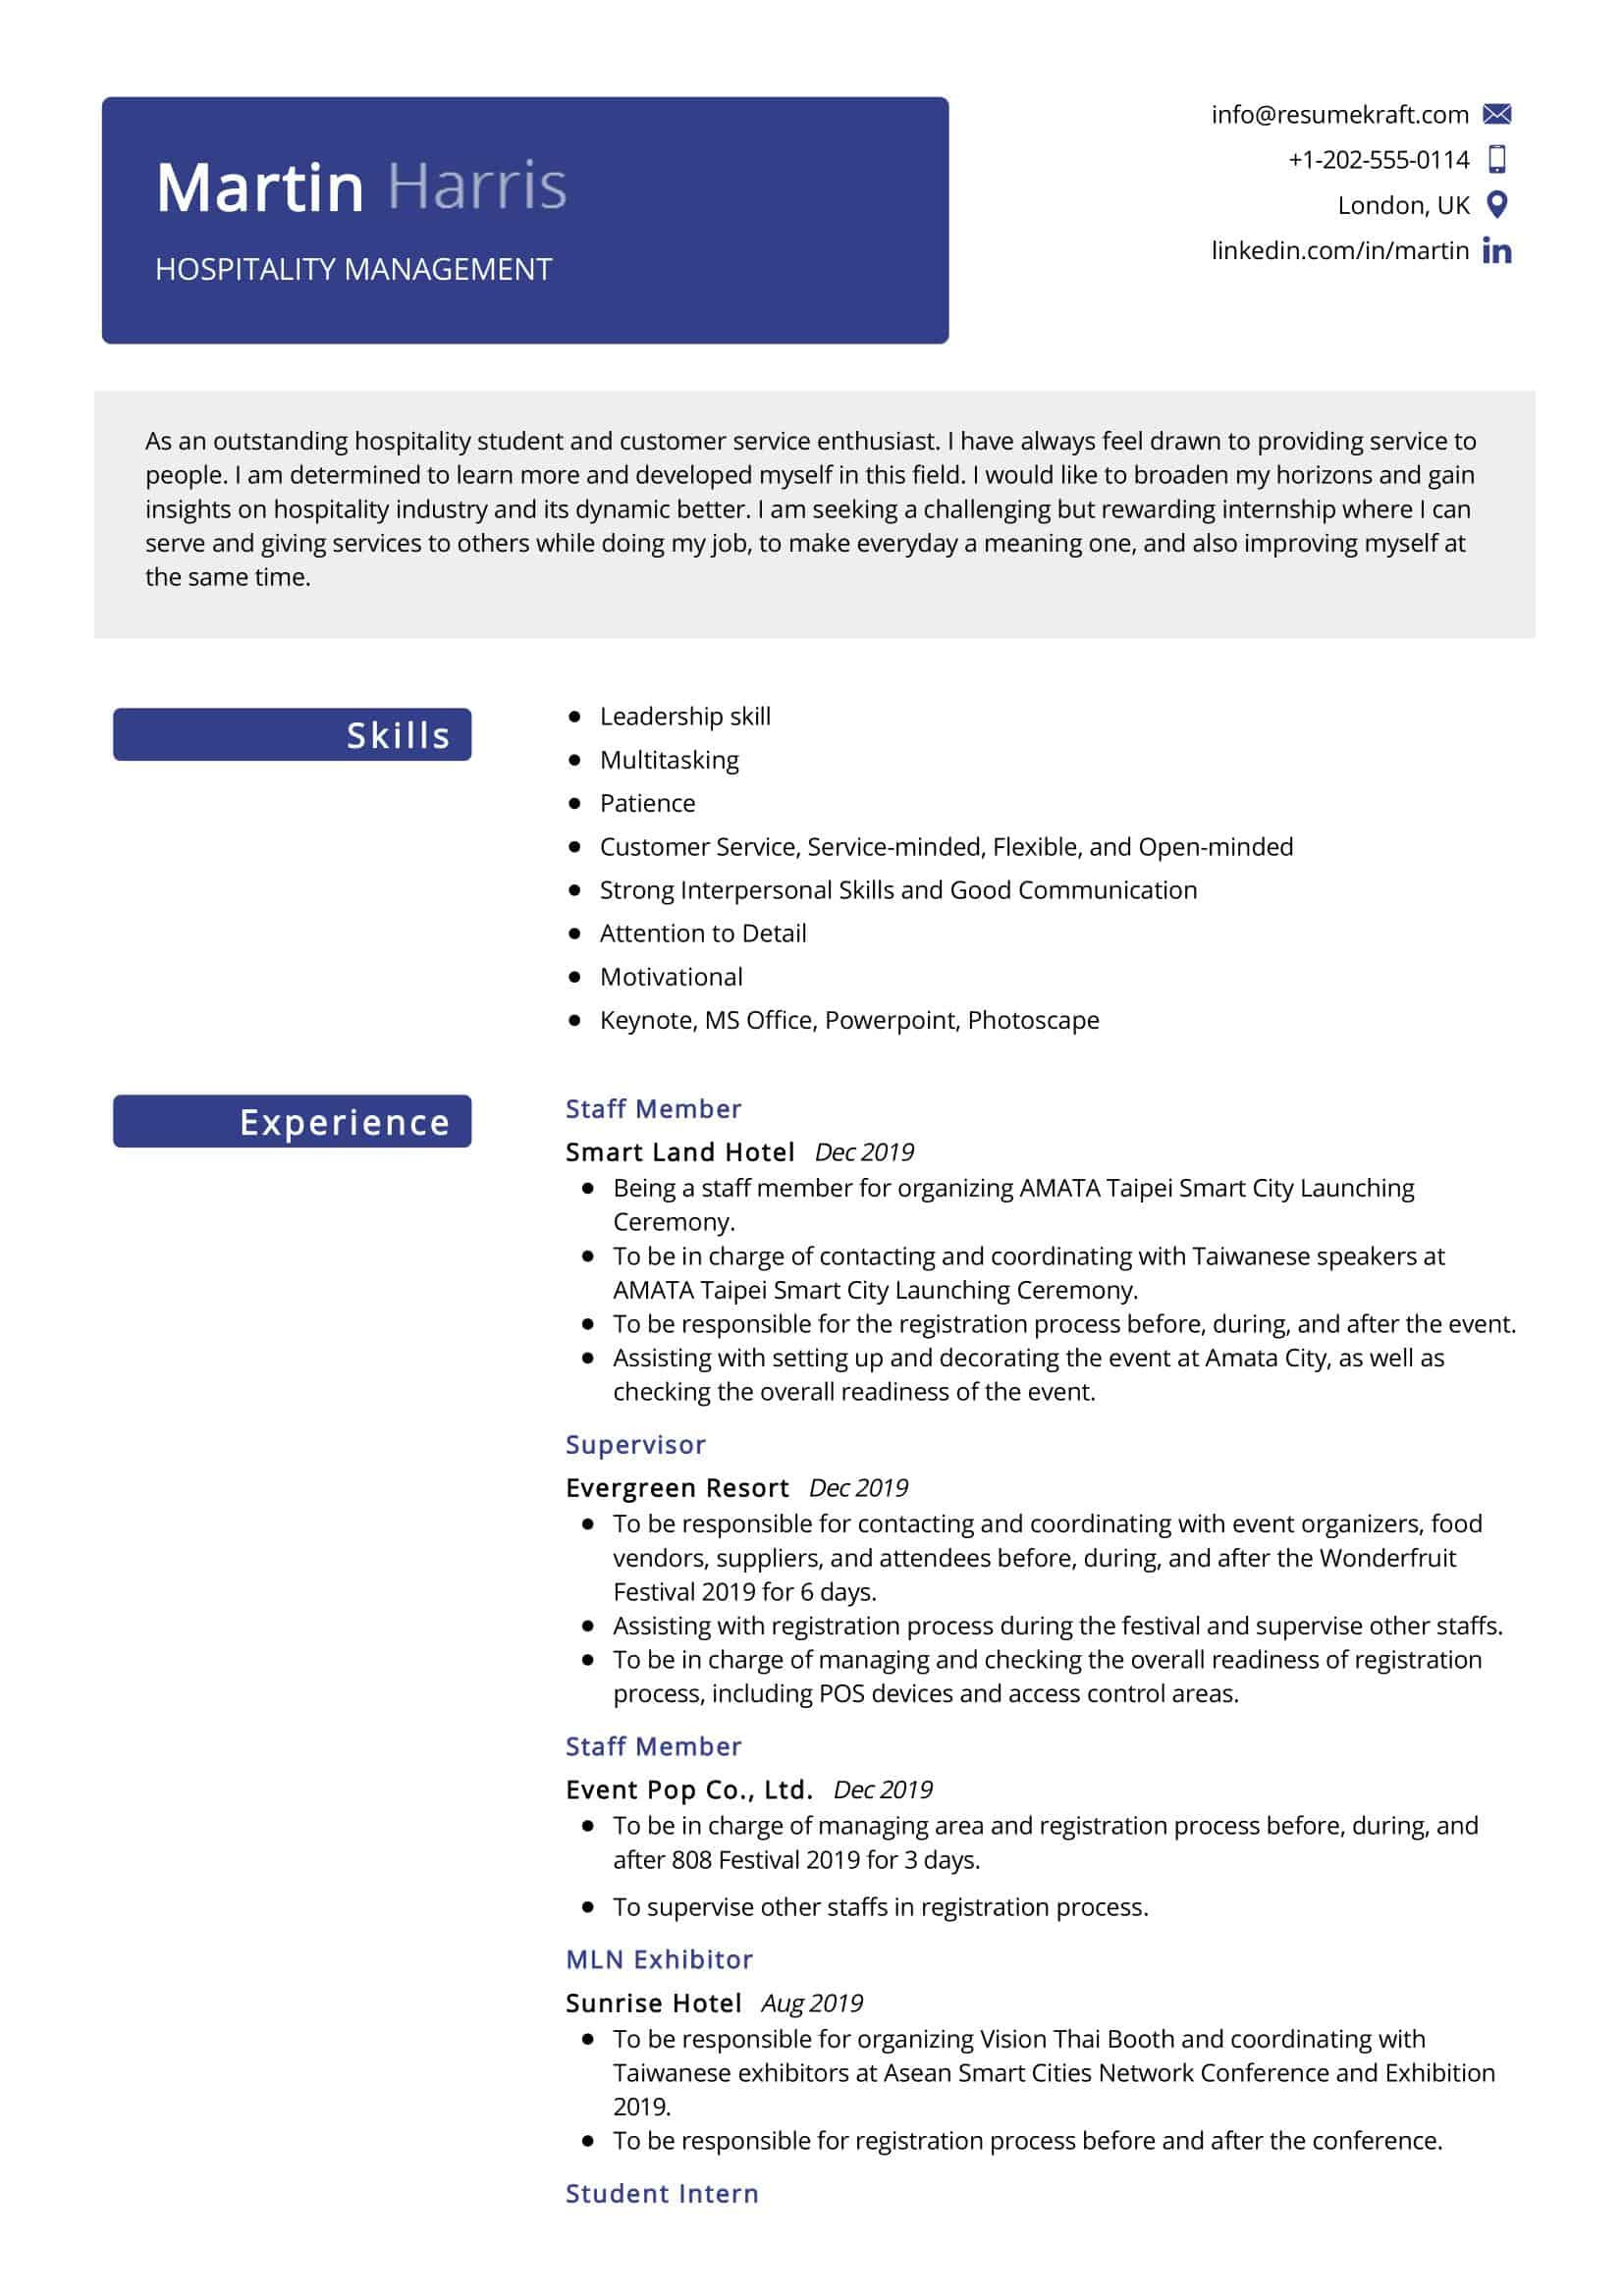 Sample Resume Describe Your Experience Implementing Programs and events Hospitality Management Resume Sample 2022 Writing Tips – Resumekraft